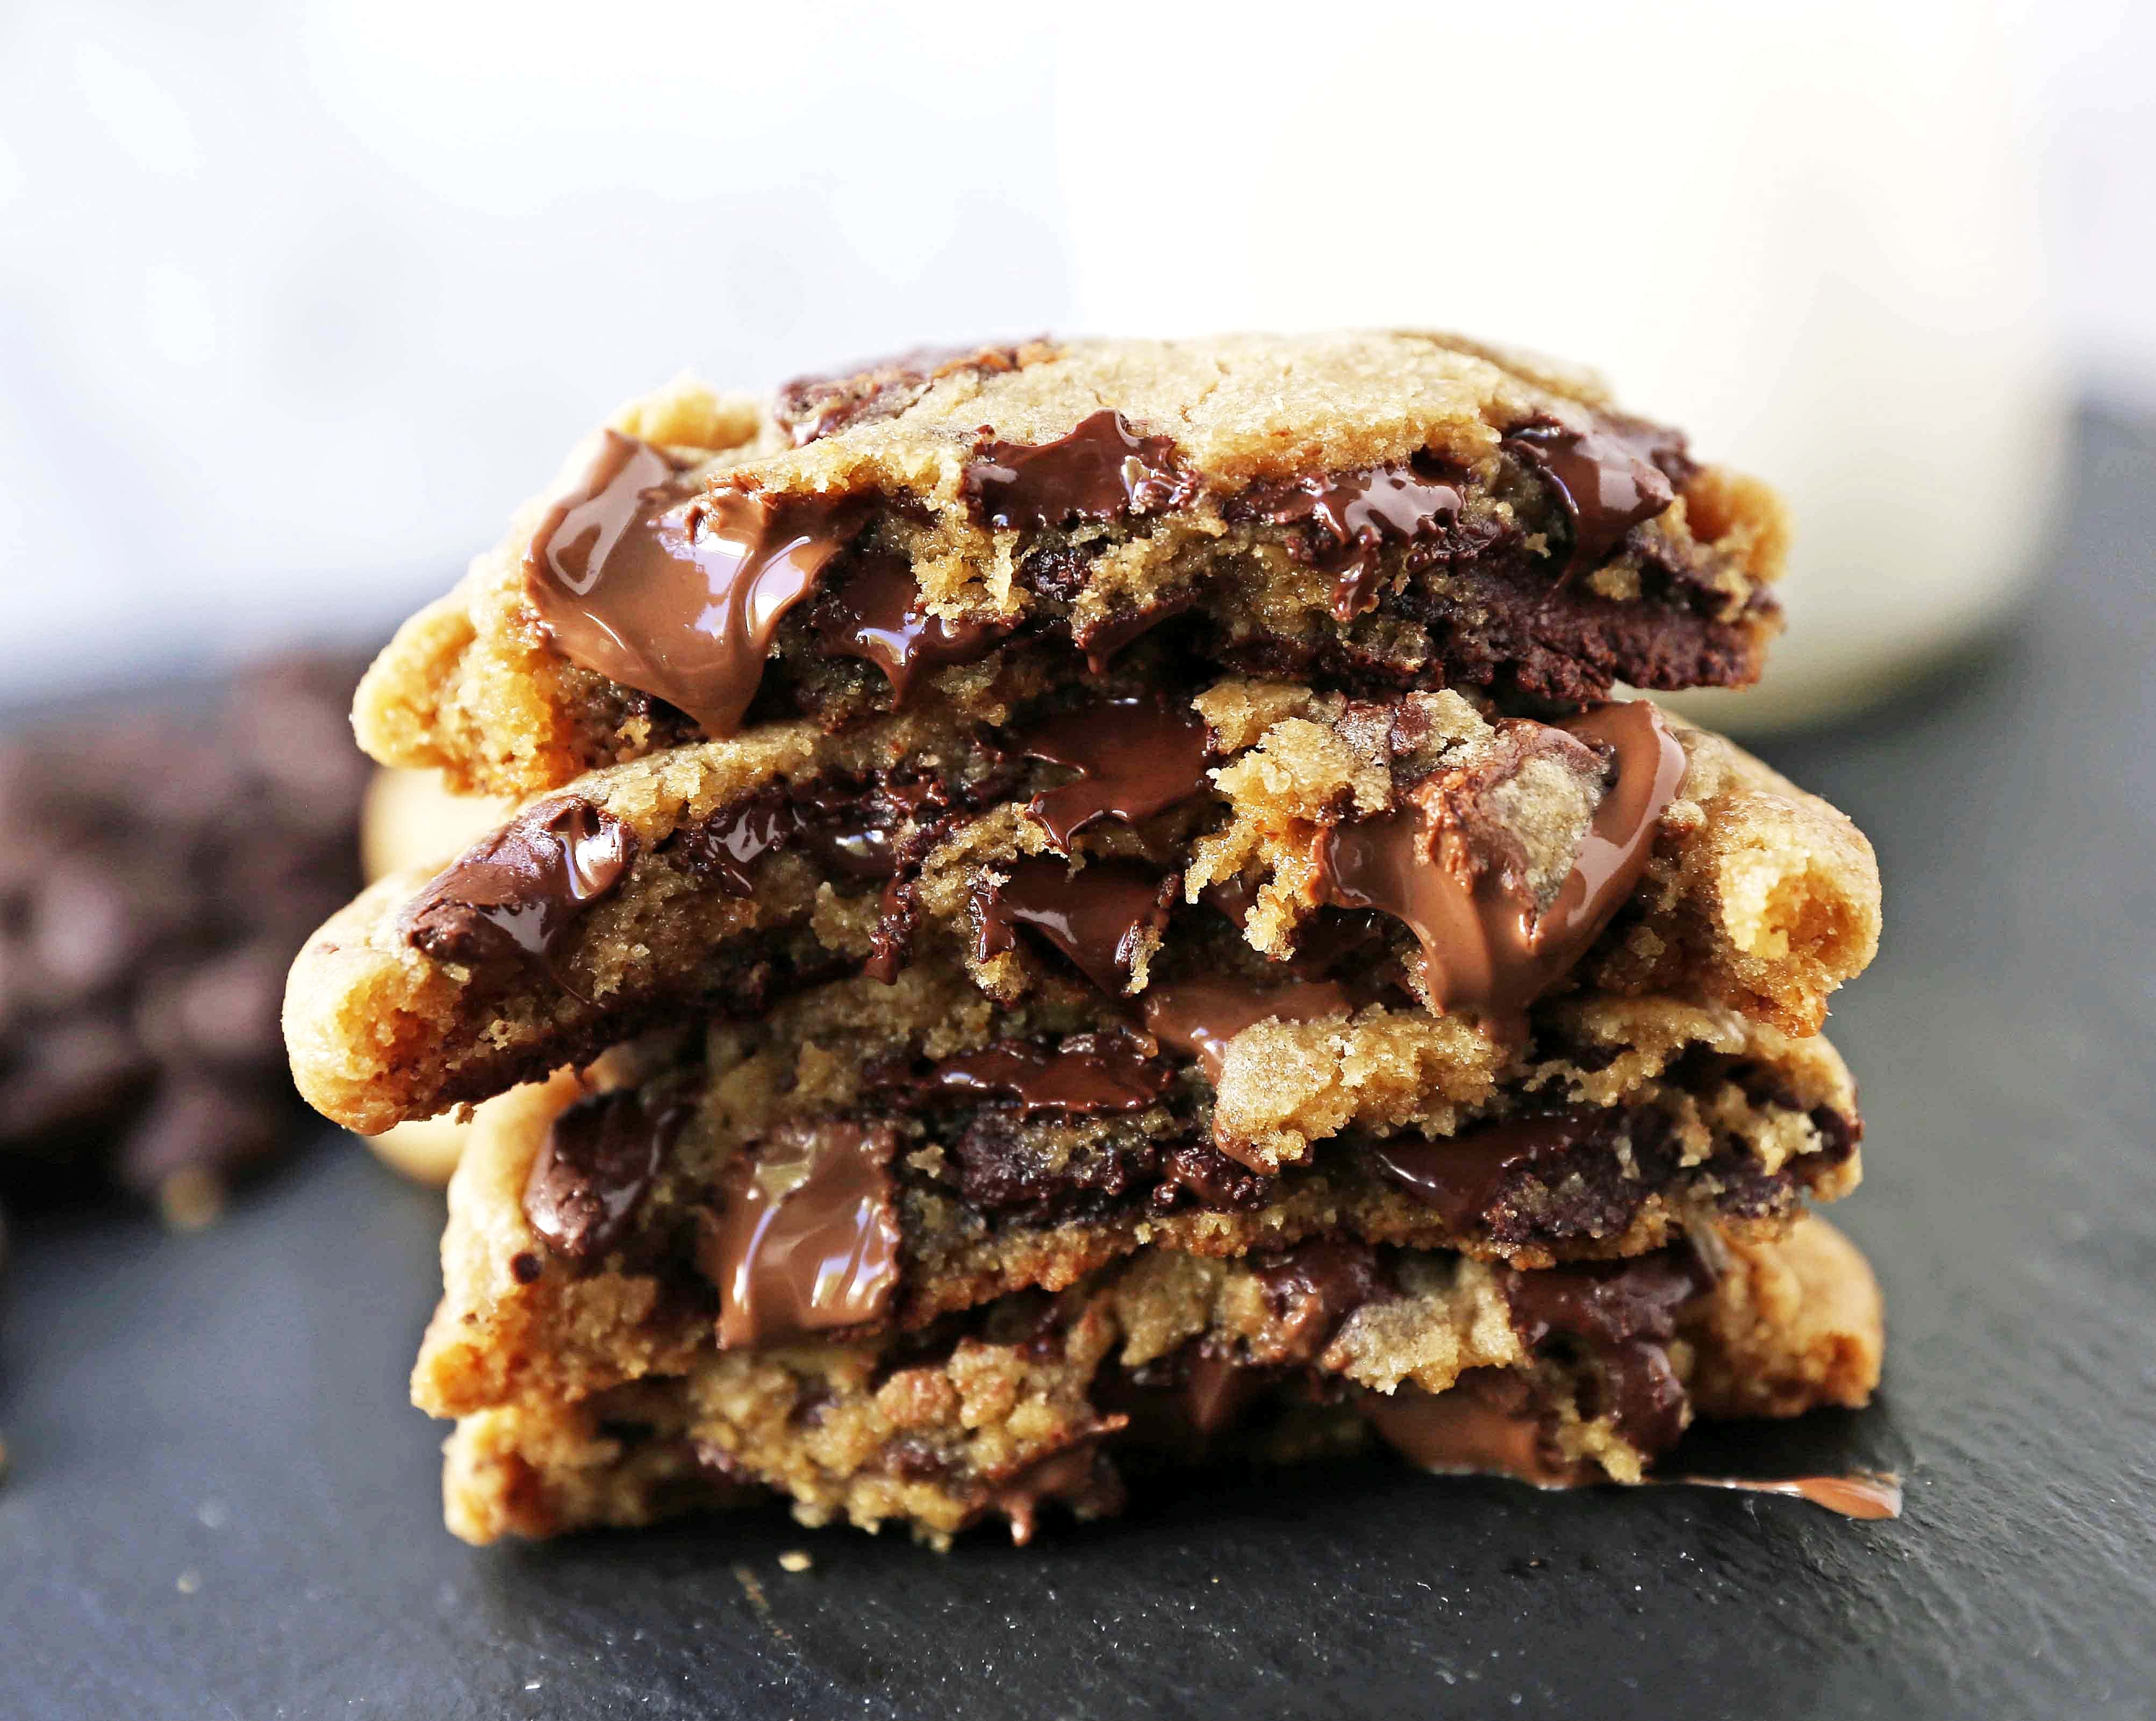 Brown Butter Chocolate Chip Cookies. How to make the best chocolate chip cookies. www.modernhoney.com #chocolatechipcookies #brownbuttercookies #chocolatechipcookie #cookies #cookie